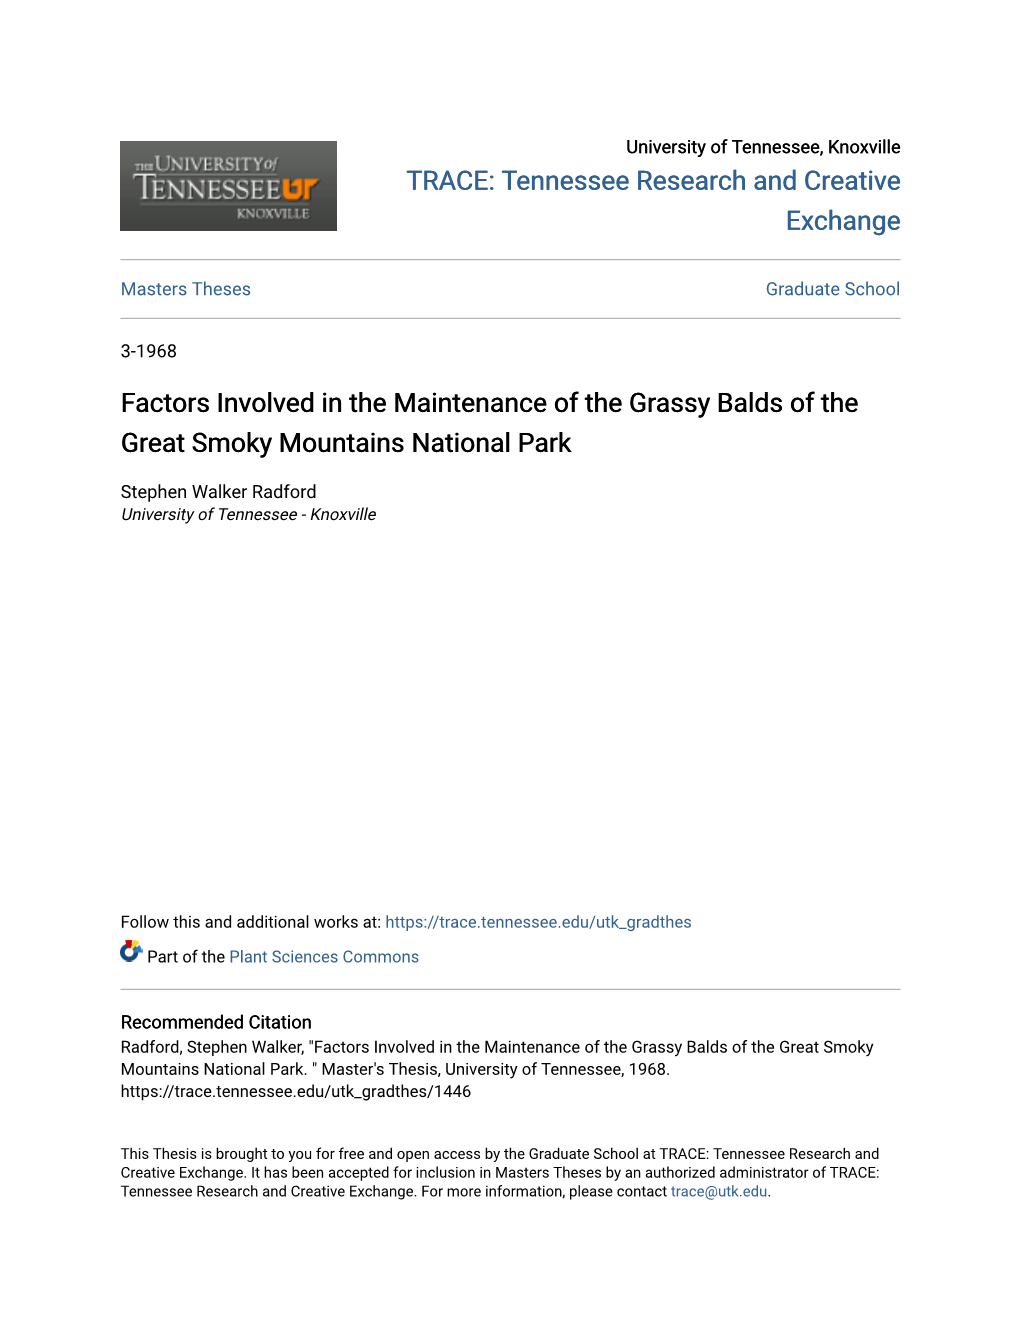 Factors Involved in the Maintenance of the Grassy Balds of the Great Smoky Mountains National Park